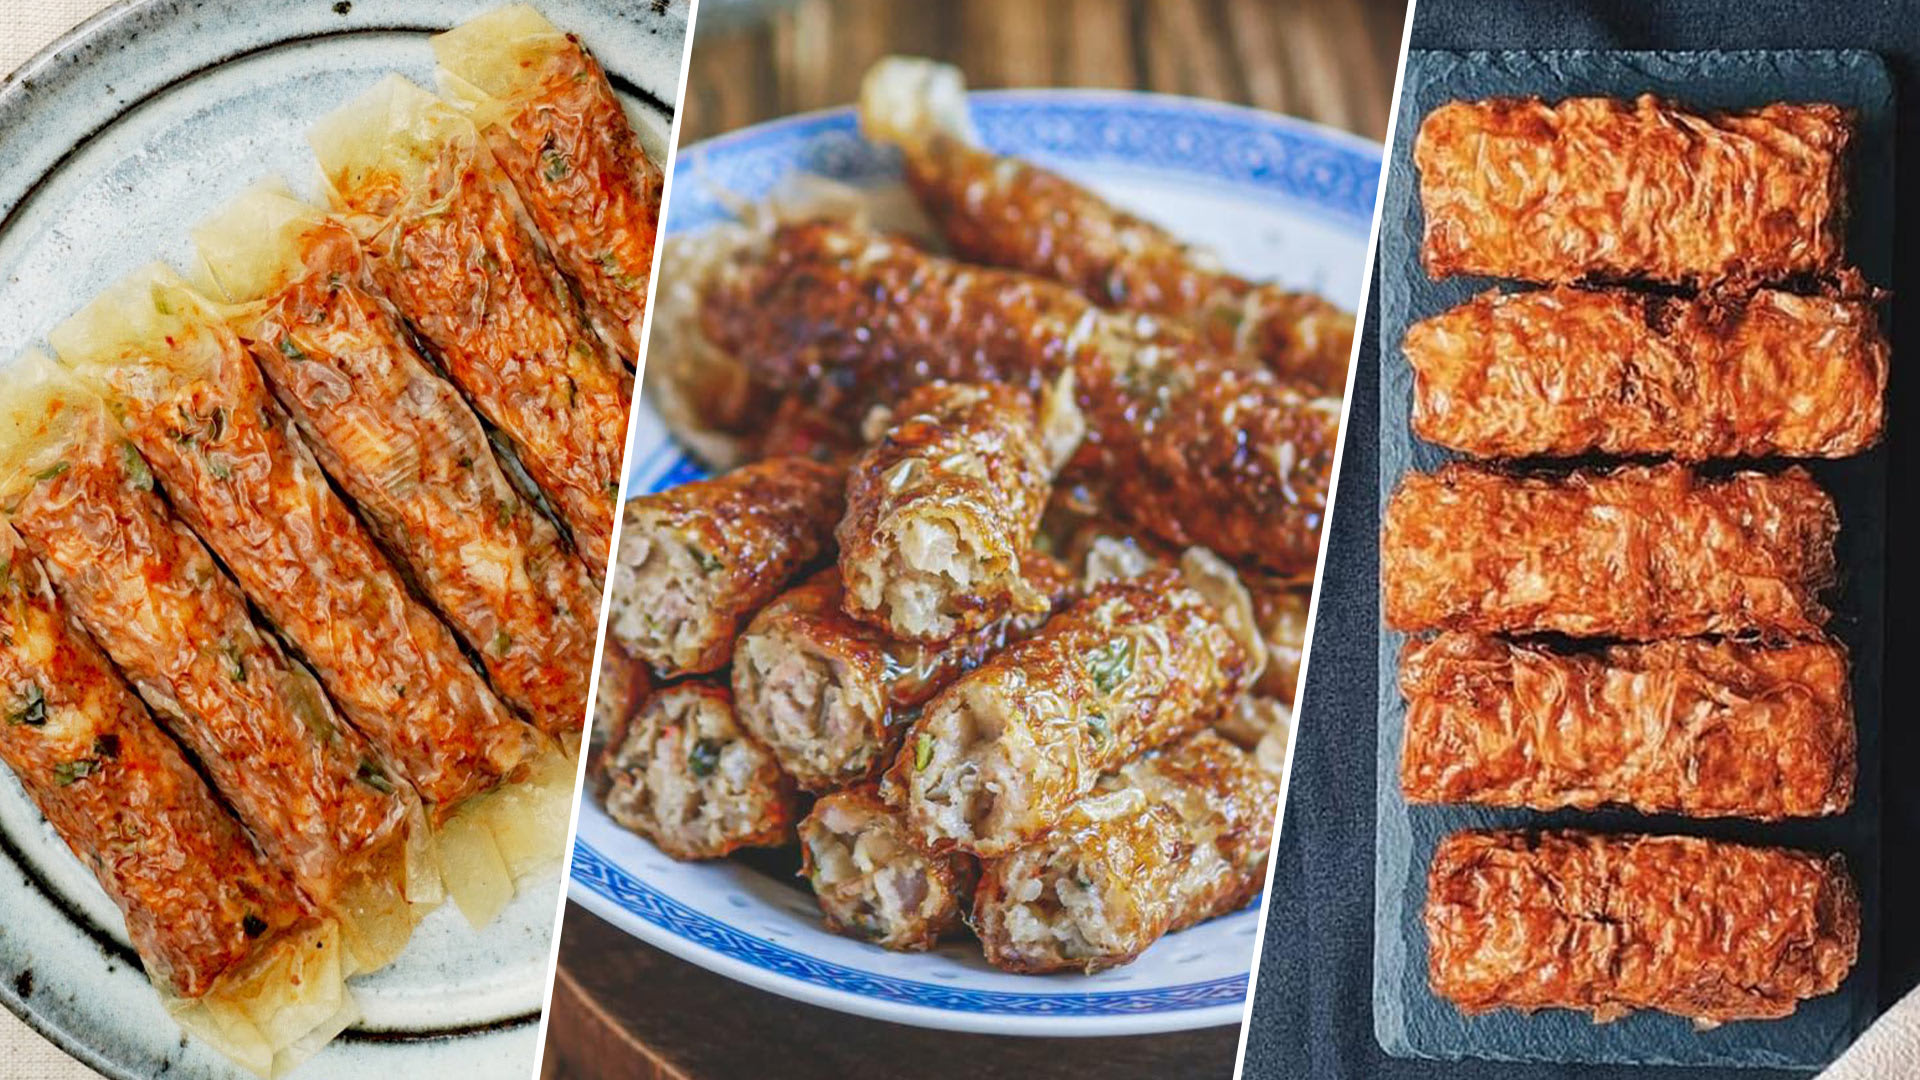 12 Ngoh Hiangs From Home-Based Businesses To Try This Chinese New Year